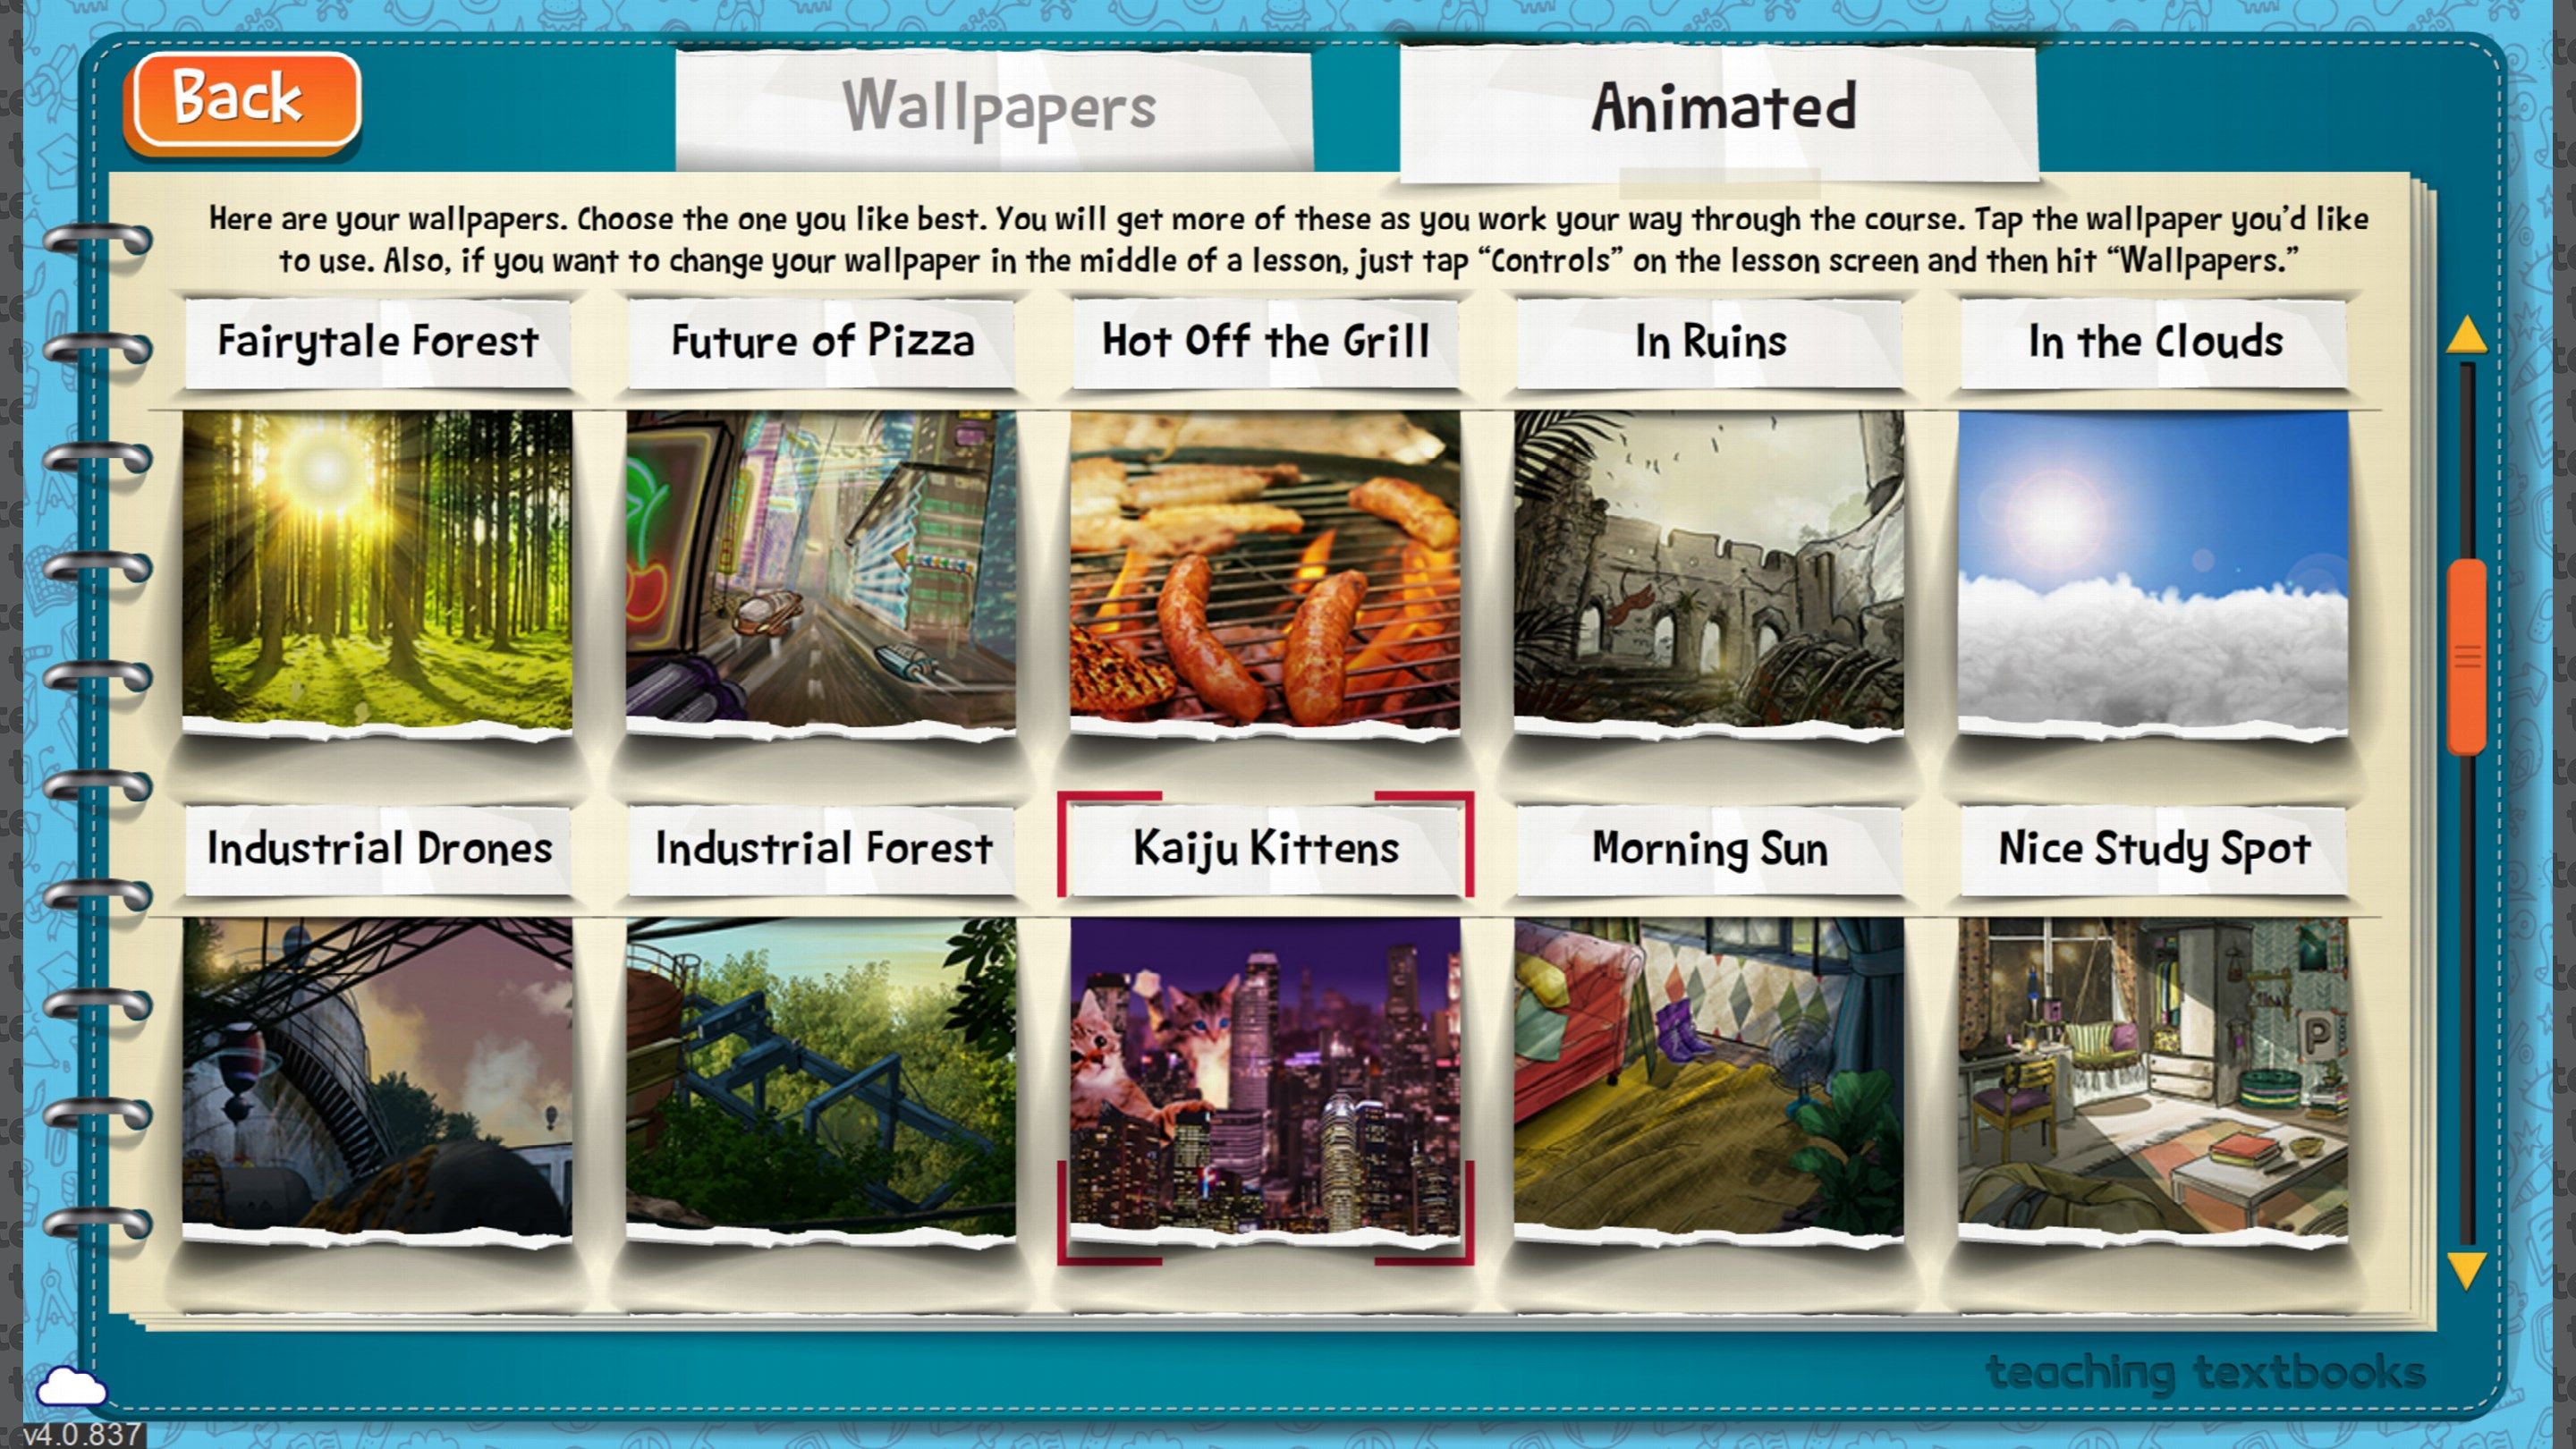 The student can customize how the app looks, with a wide selection of beautiful static or animated wallpapers.